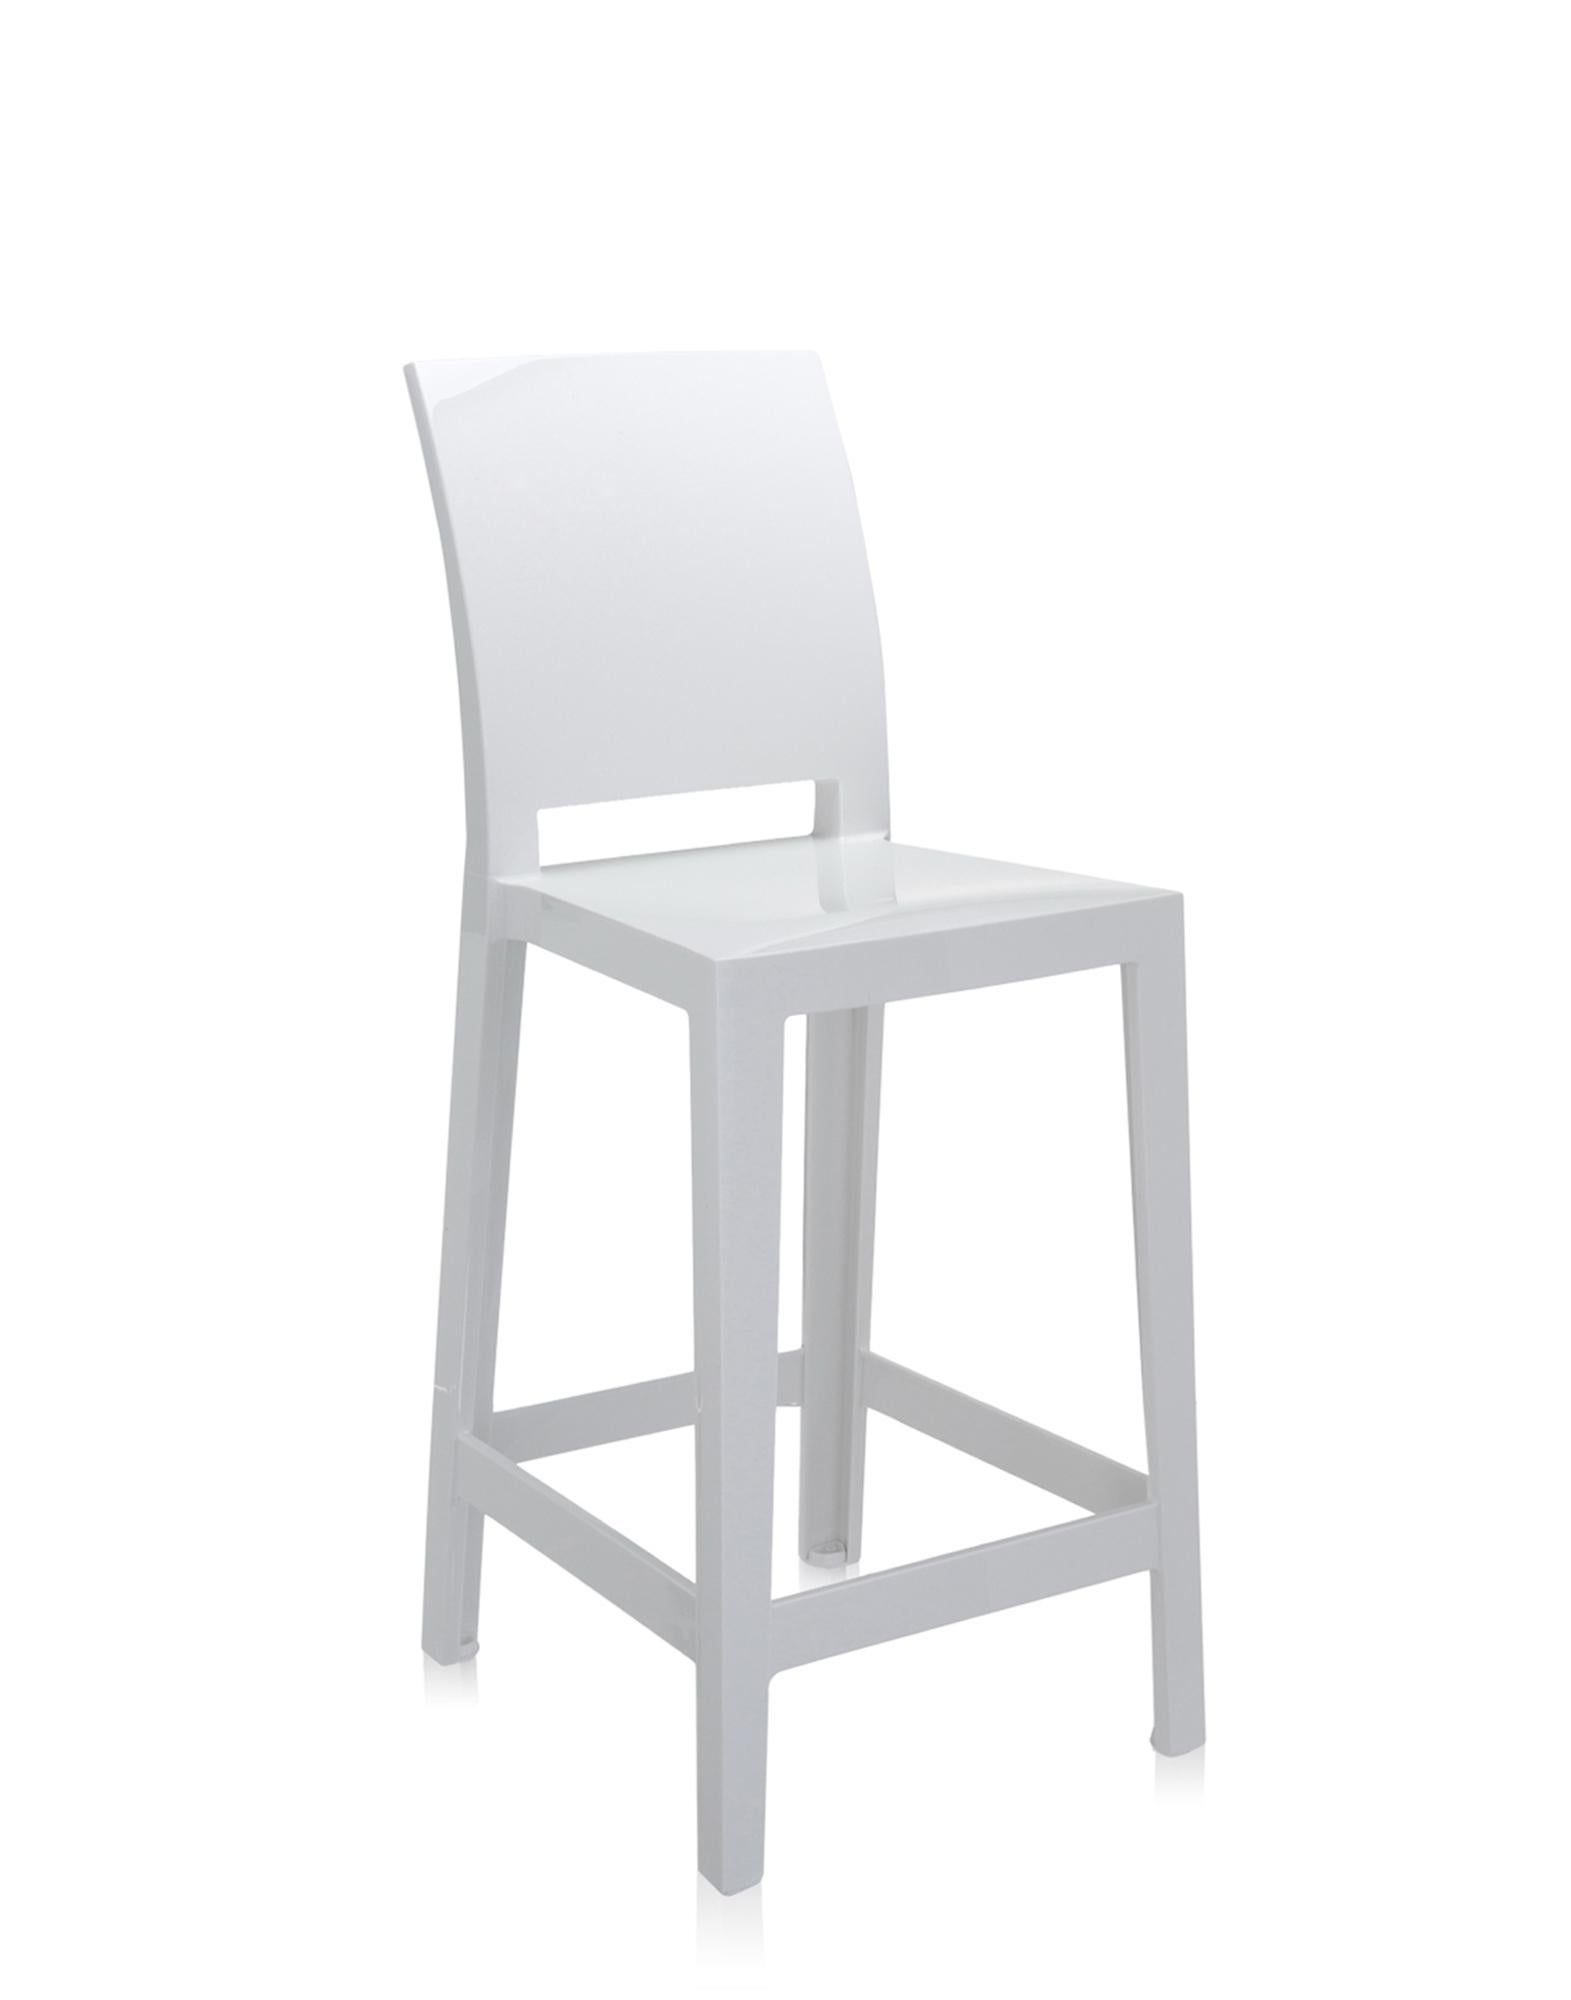 If you want to sip a drink at the bar in peace and quiet, you need a comfortable tall stool with a back to lean against. Sometimes one drink is not enough - and you need 